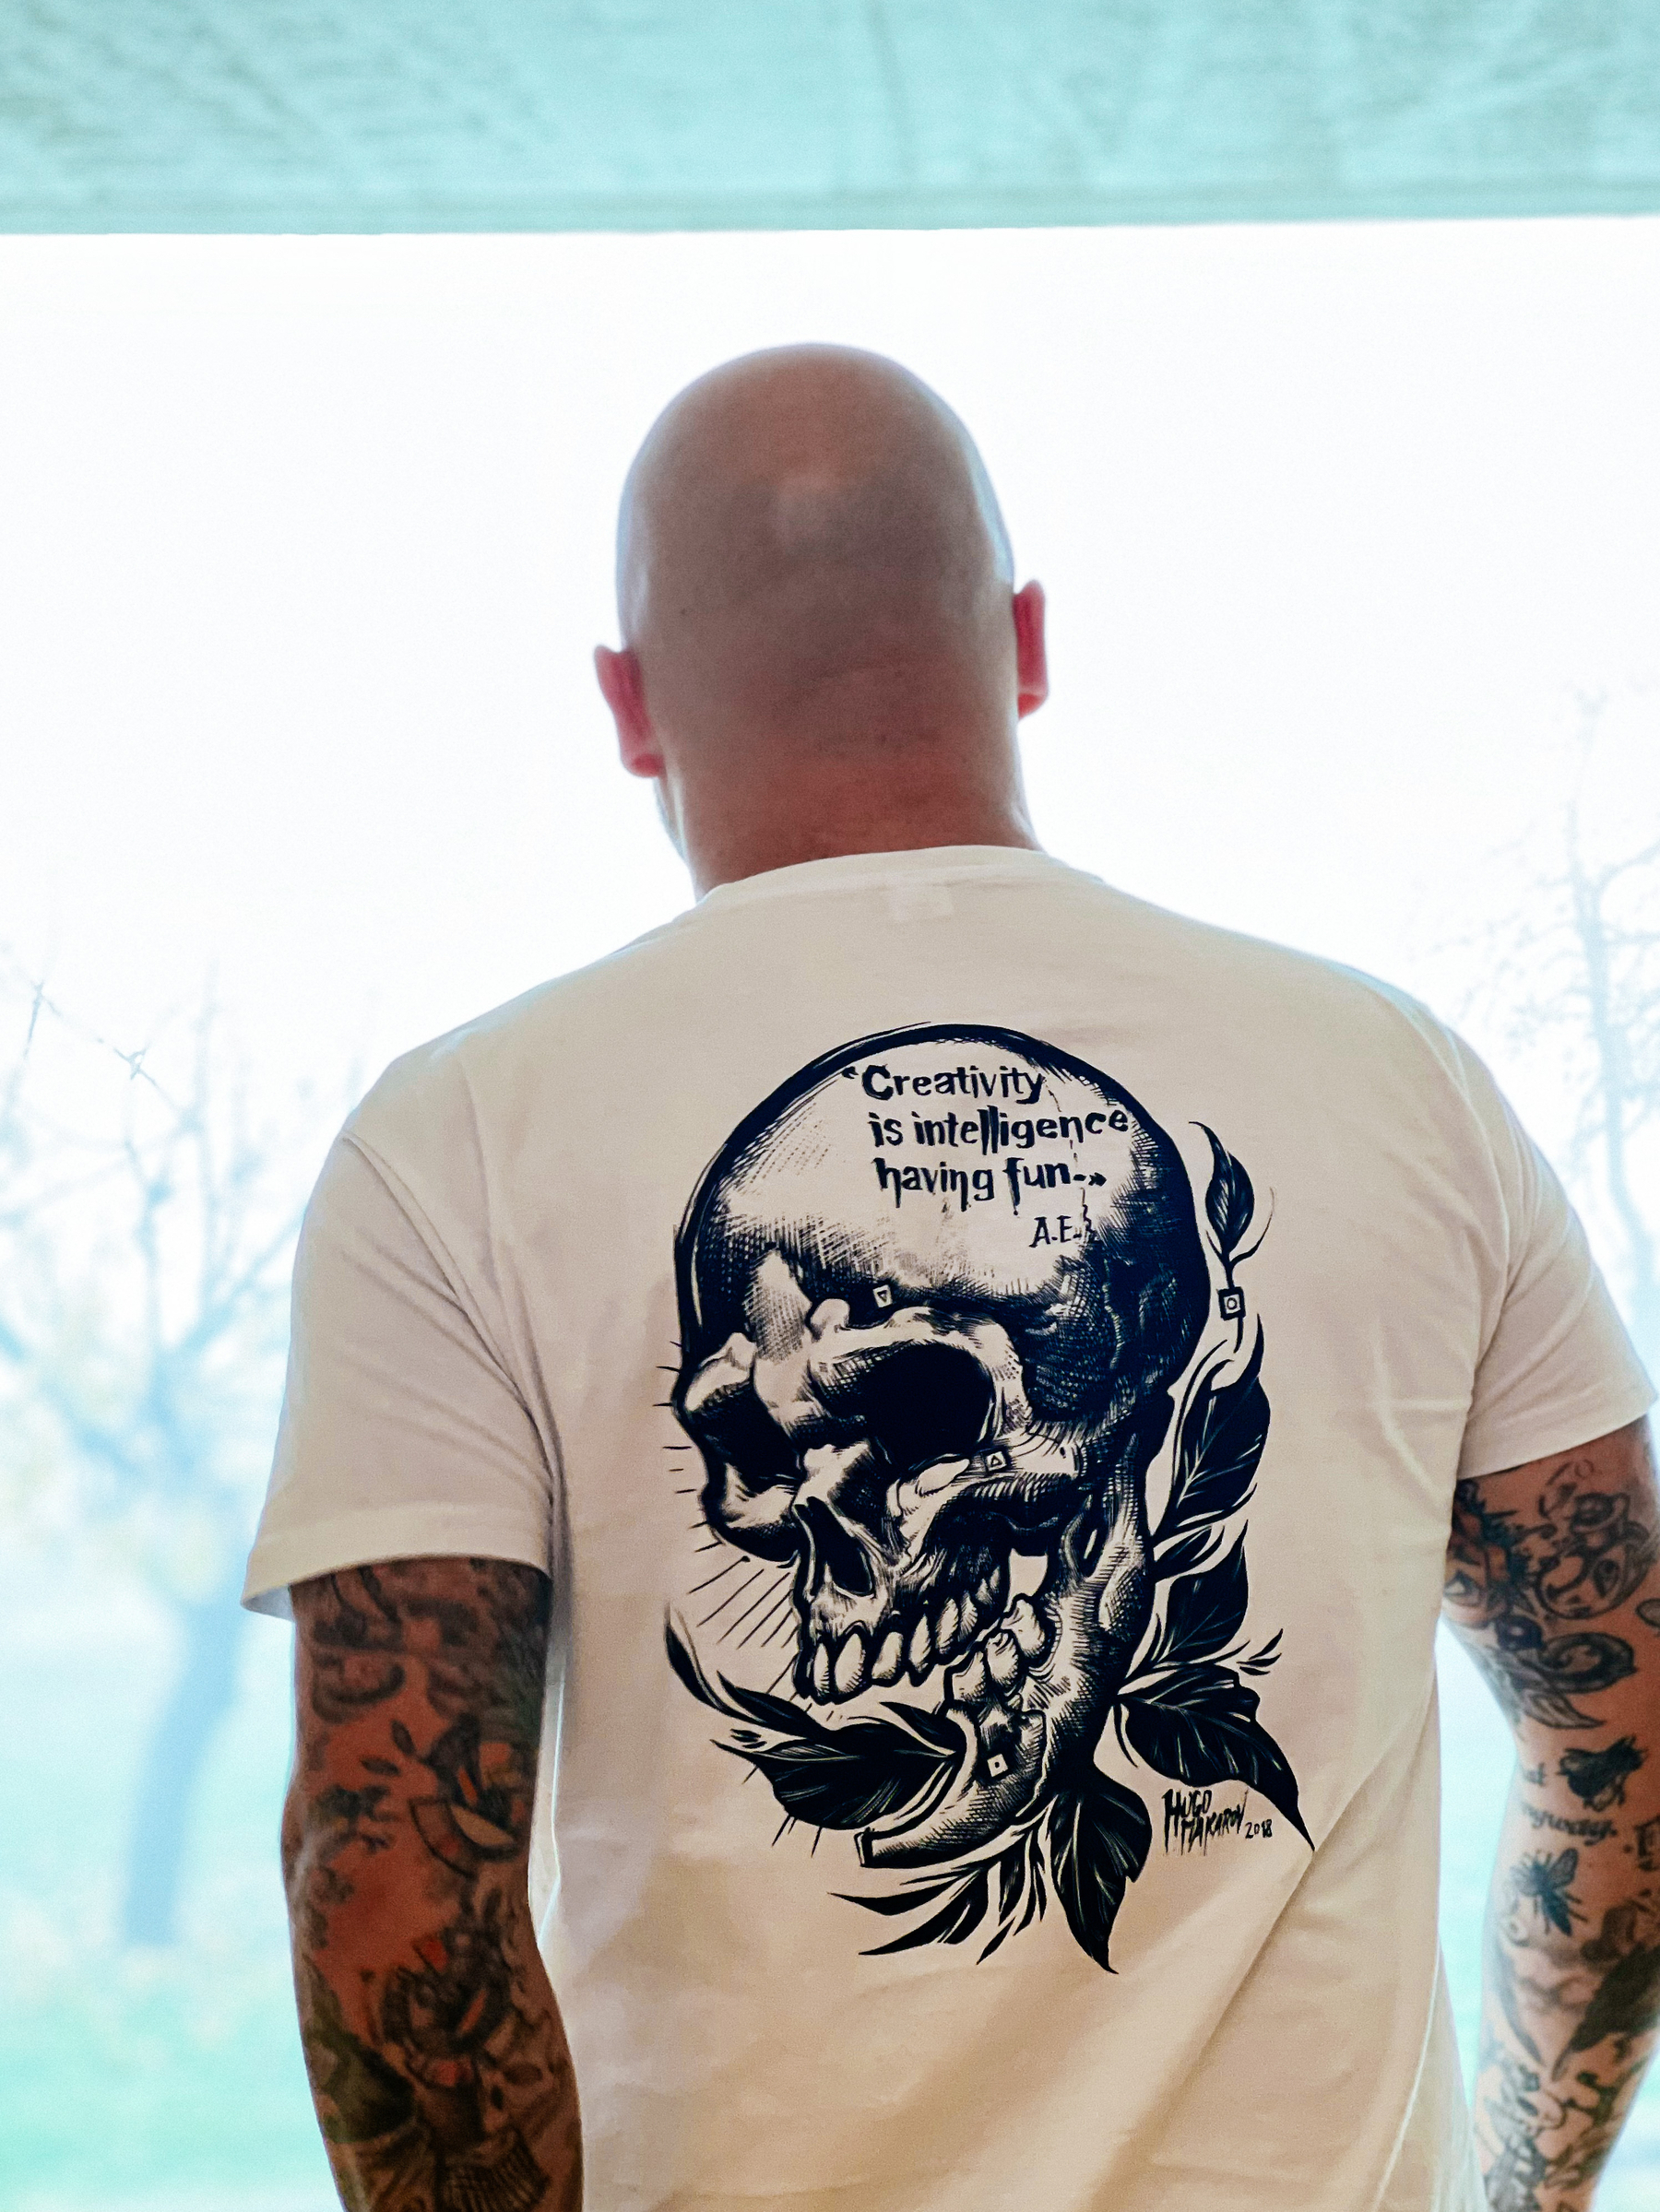 A man stands with his back turned to us, wearing a t-shirt that has the drawing of a skull and the words “creativity is intelligence having fun” 